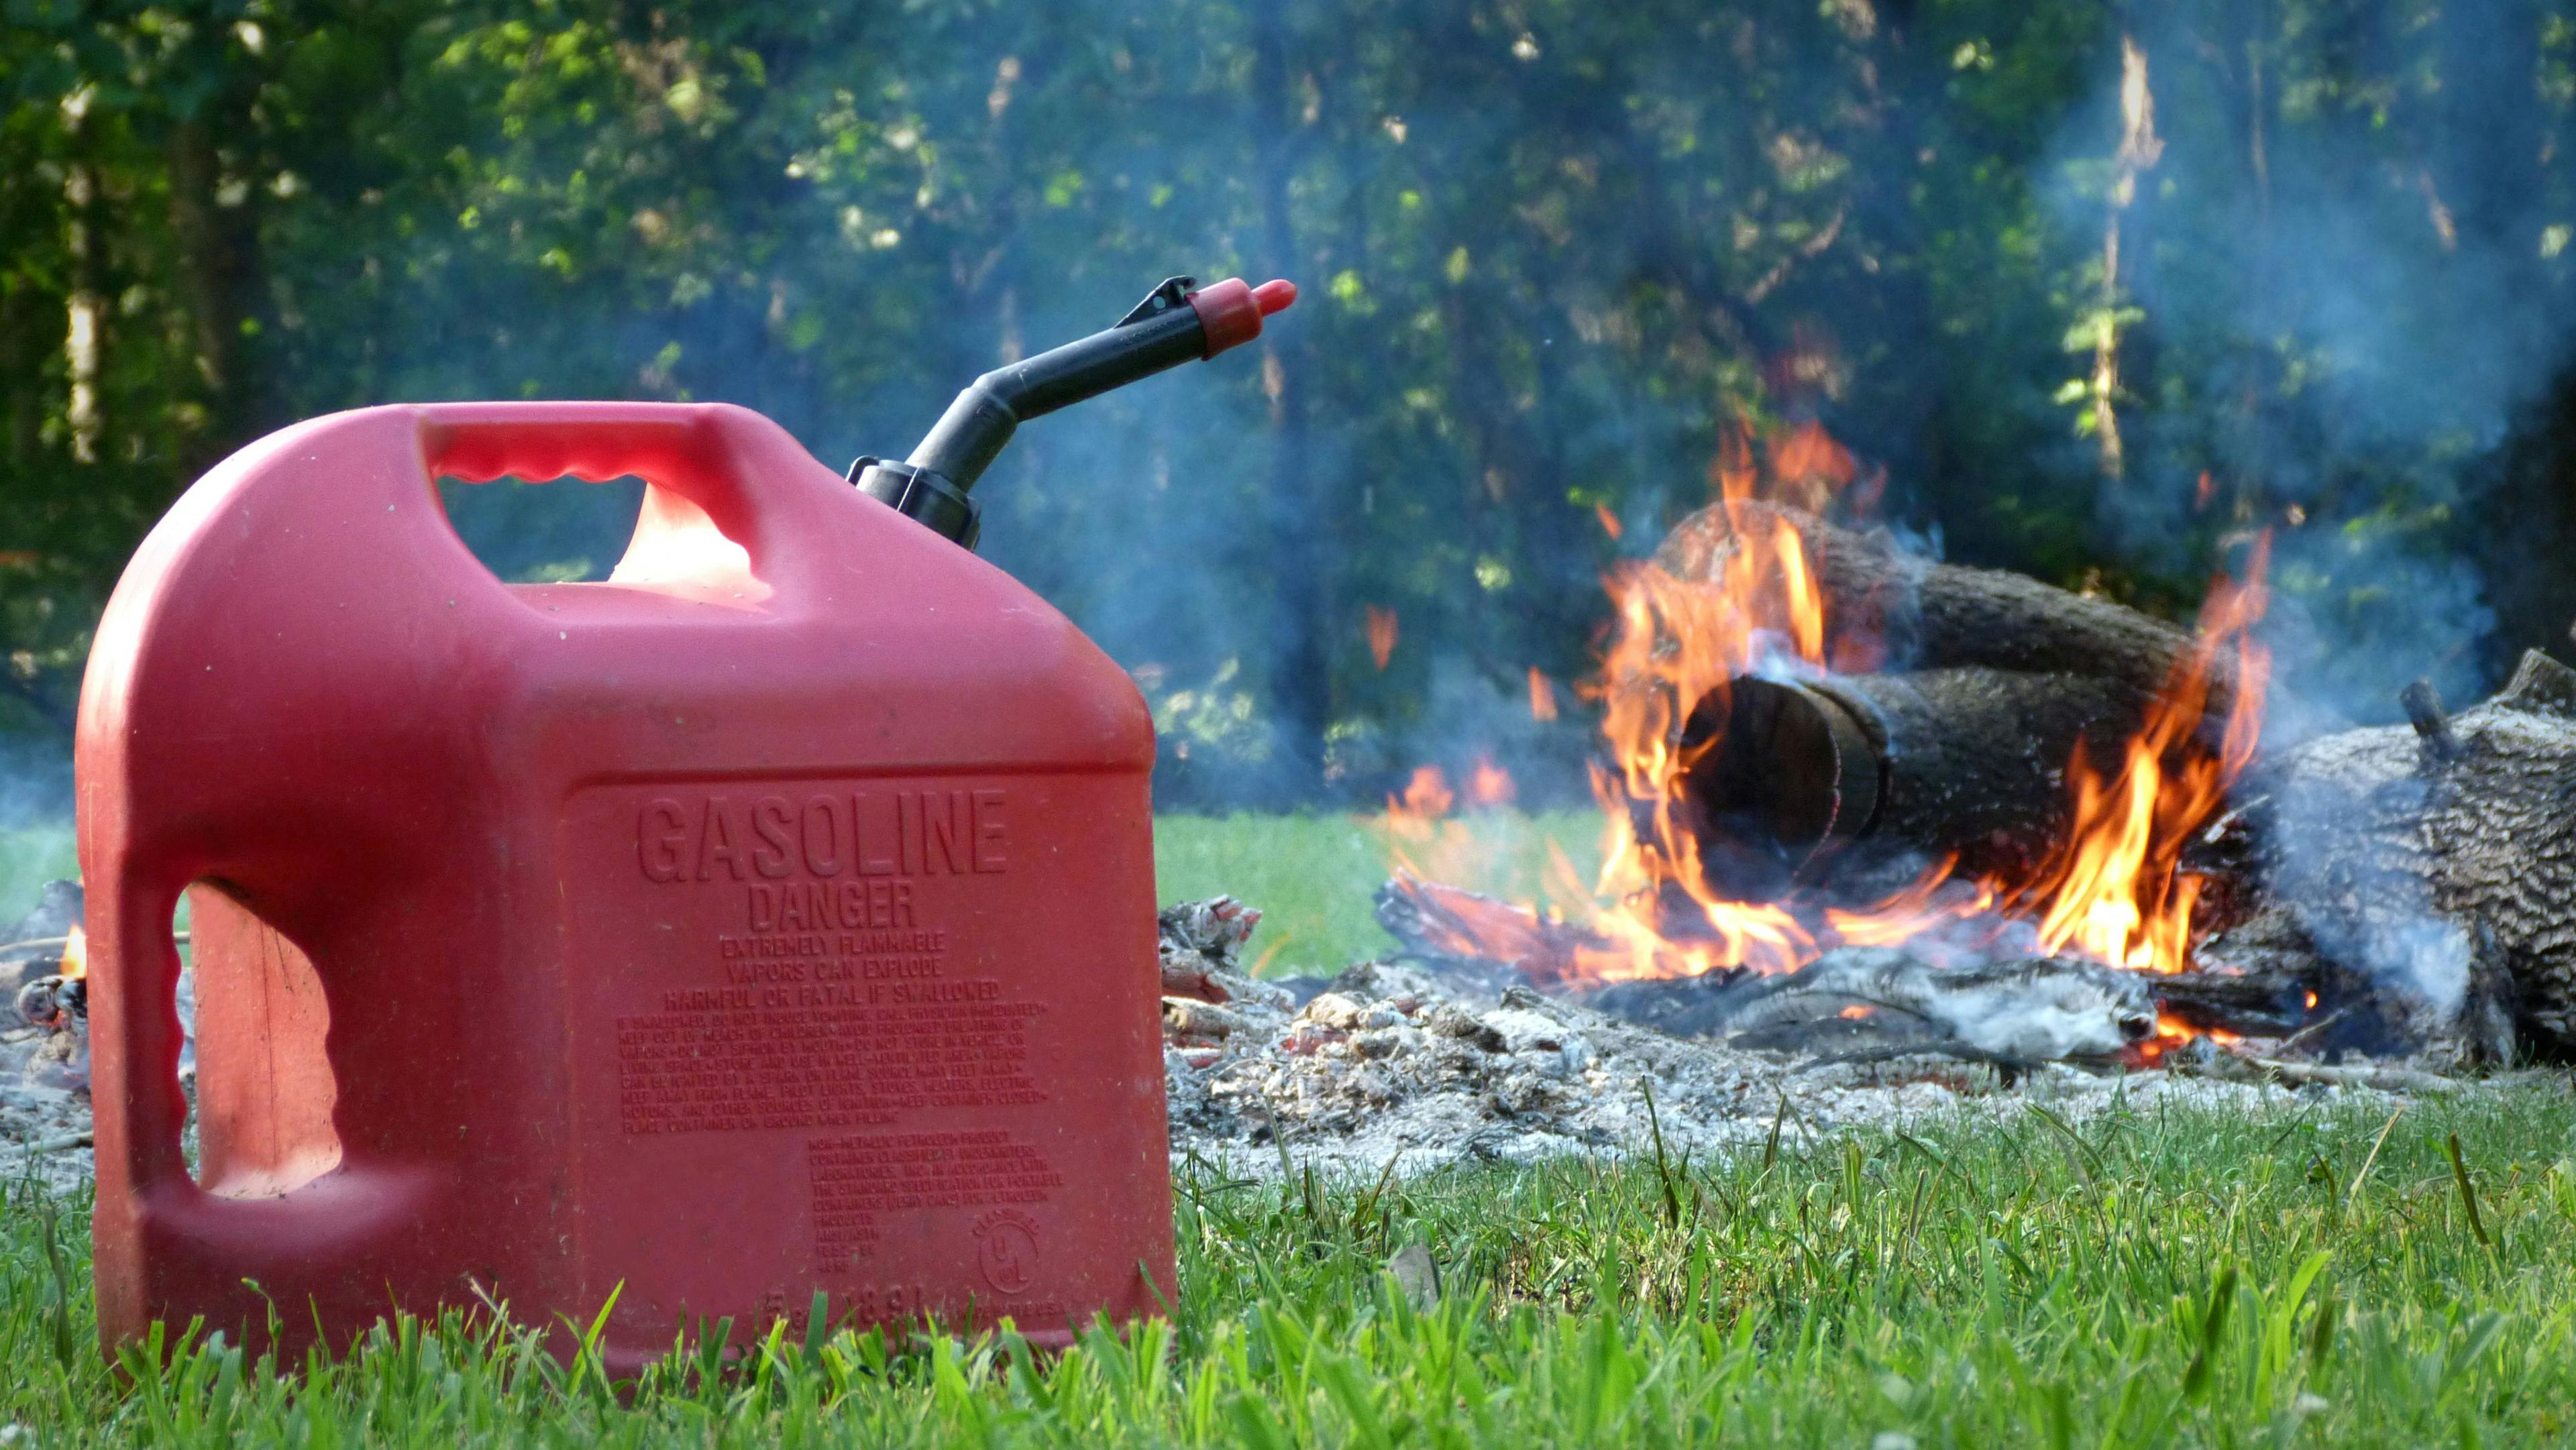 Gasoline Can in front of a Fire, Fire Hazard, Burning Hazard | Image Credit: © Alissa Yarbrough - stock.adobe.com